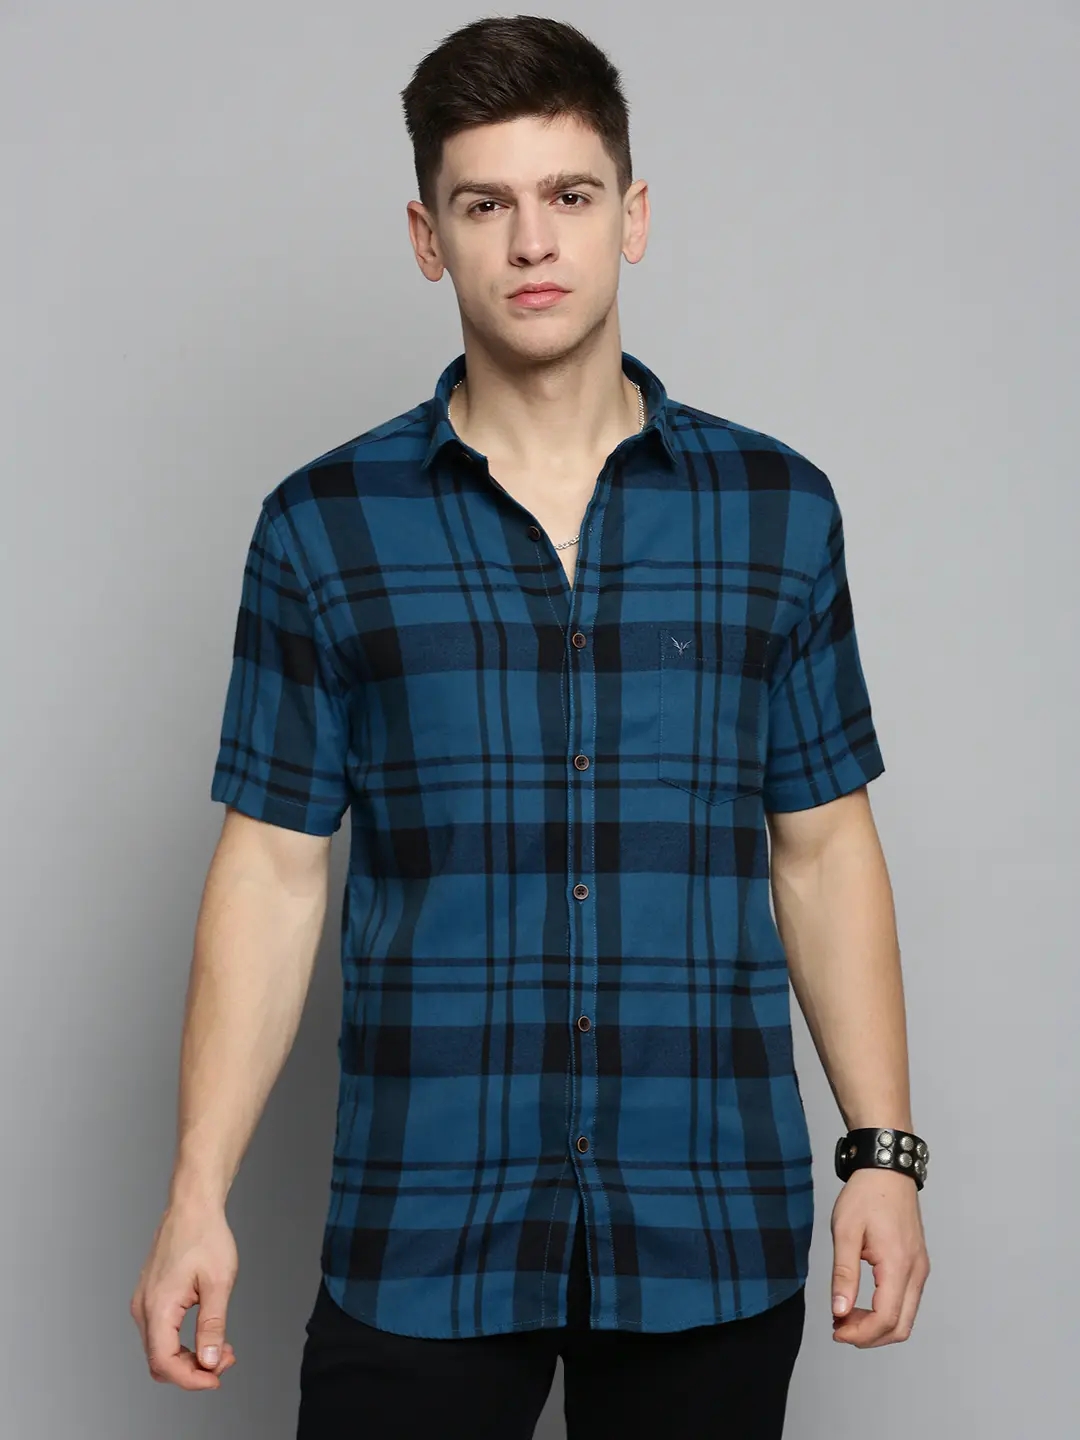 SHOWOFF Men's Spread Collar Teal Checked Shirt